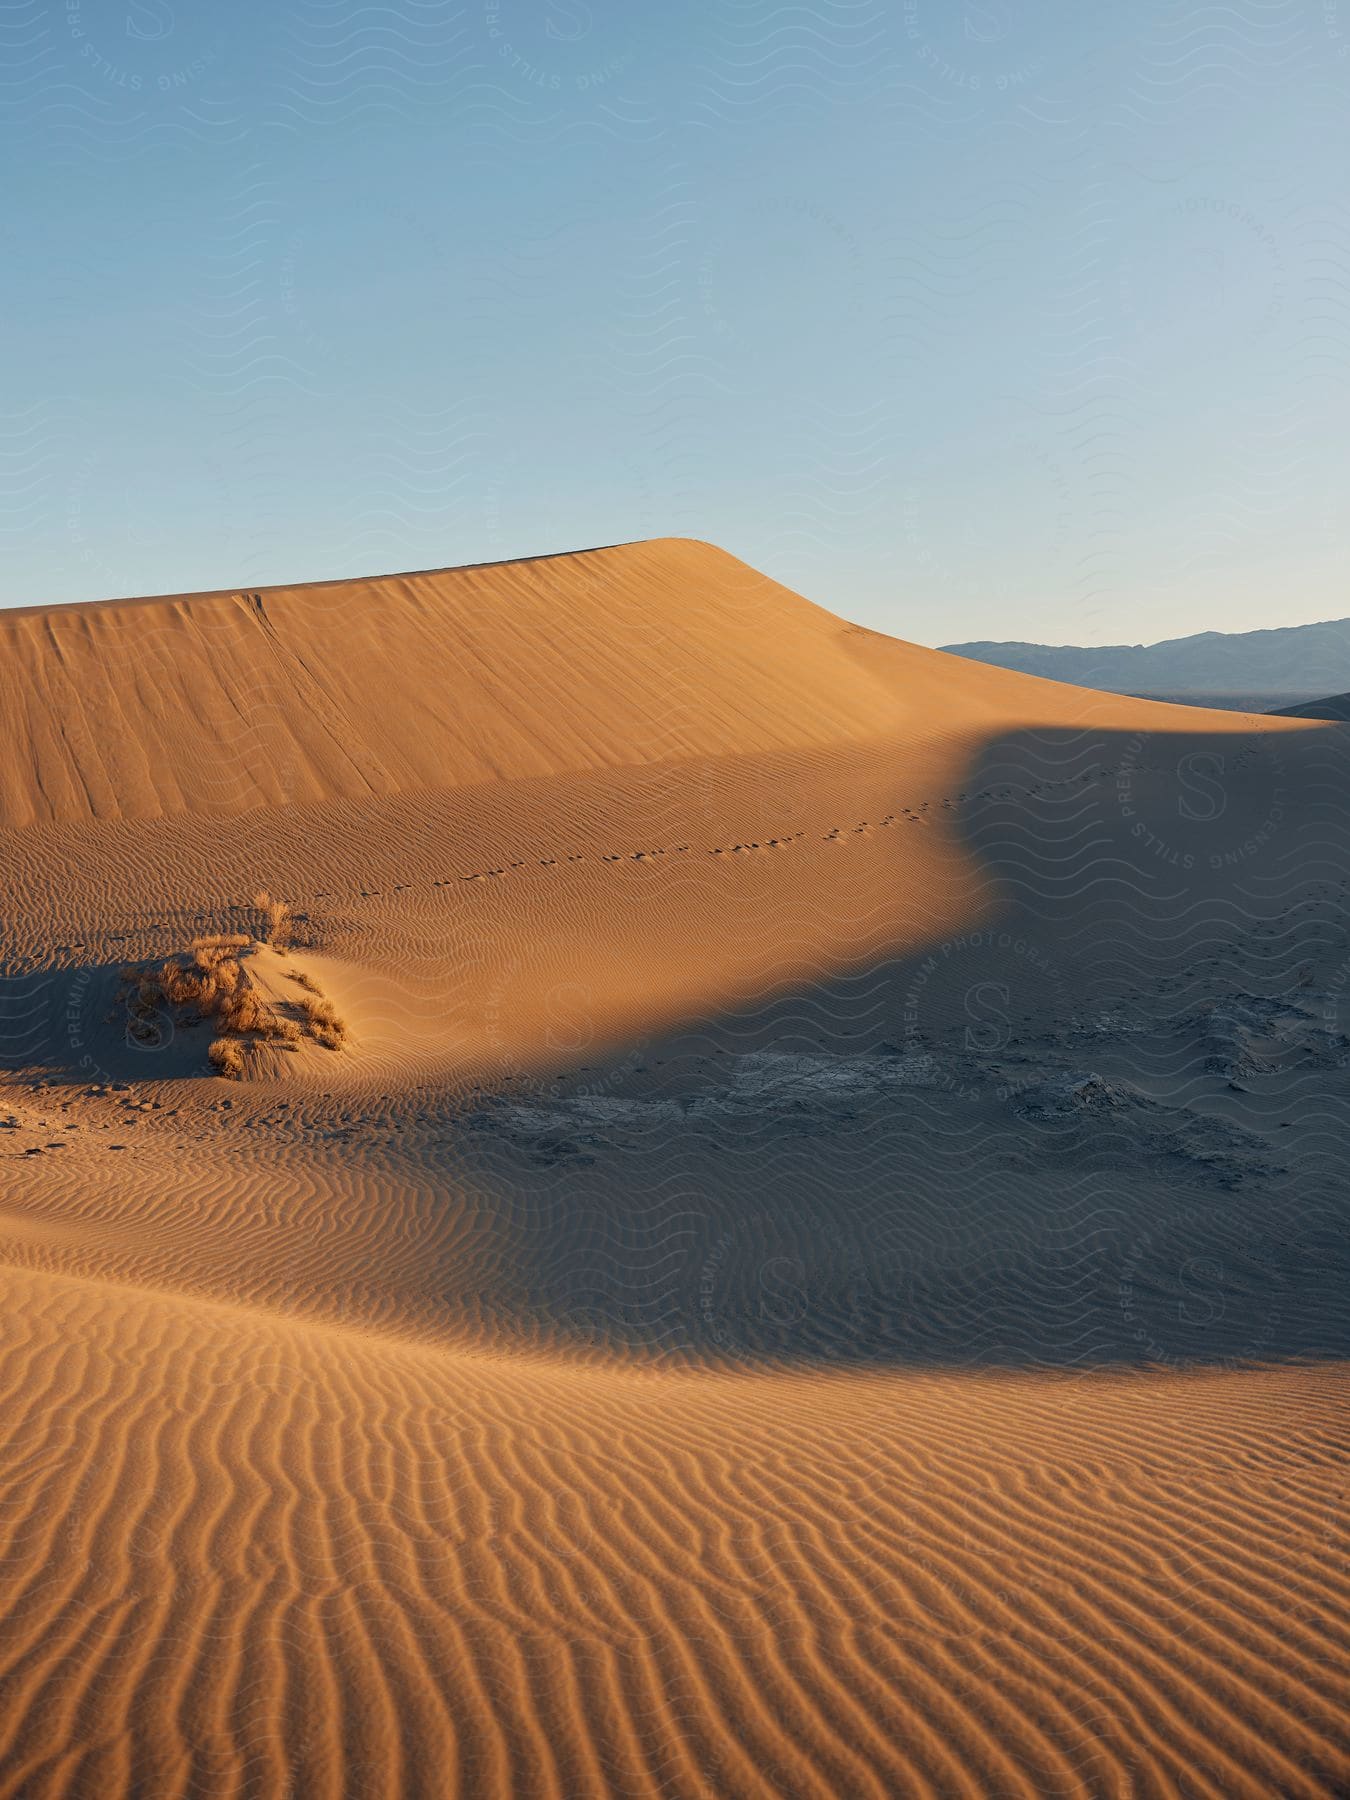 A desert with a lone desert grass in the middle, footprints crossing the sand, and hills in the distance under a blue sky.